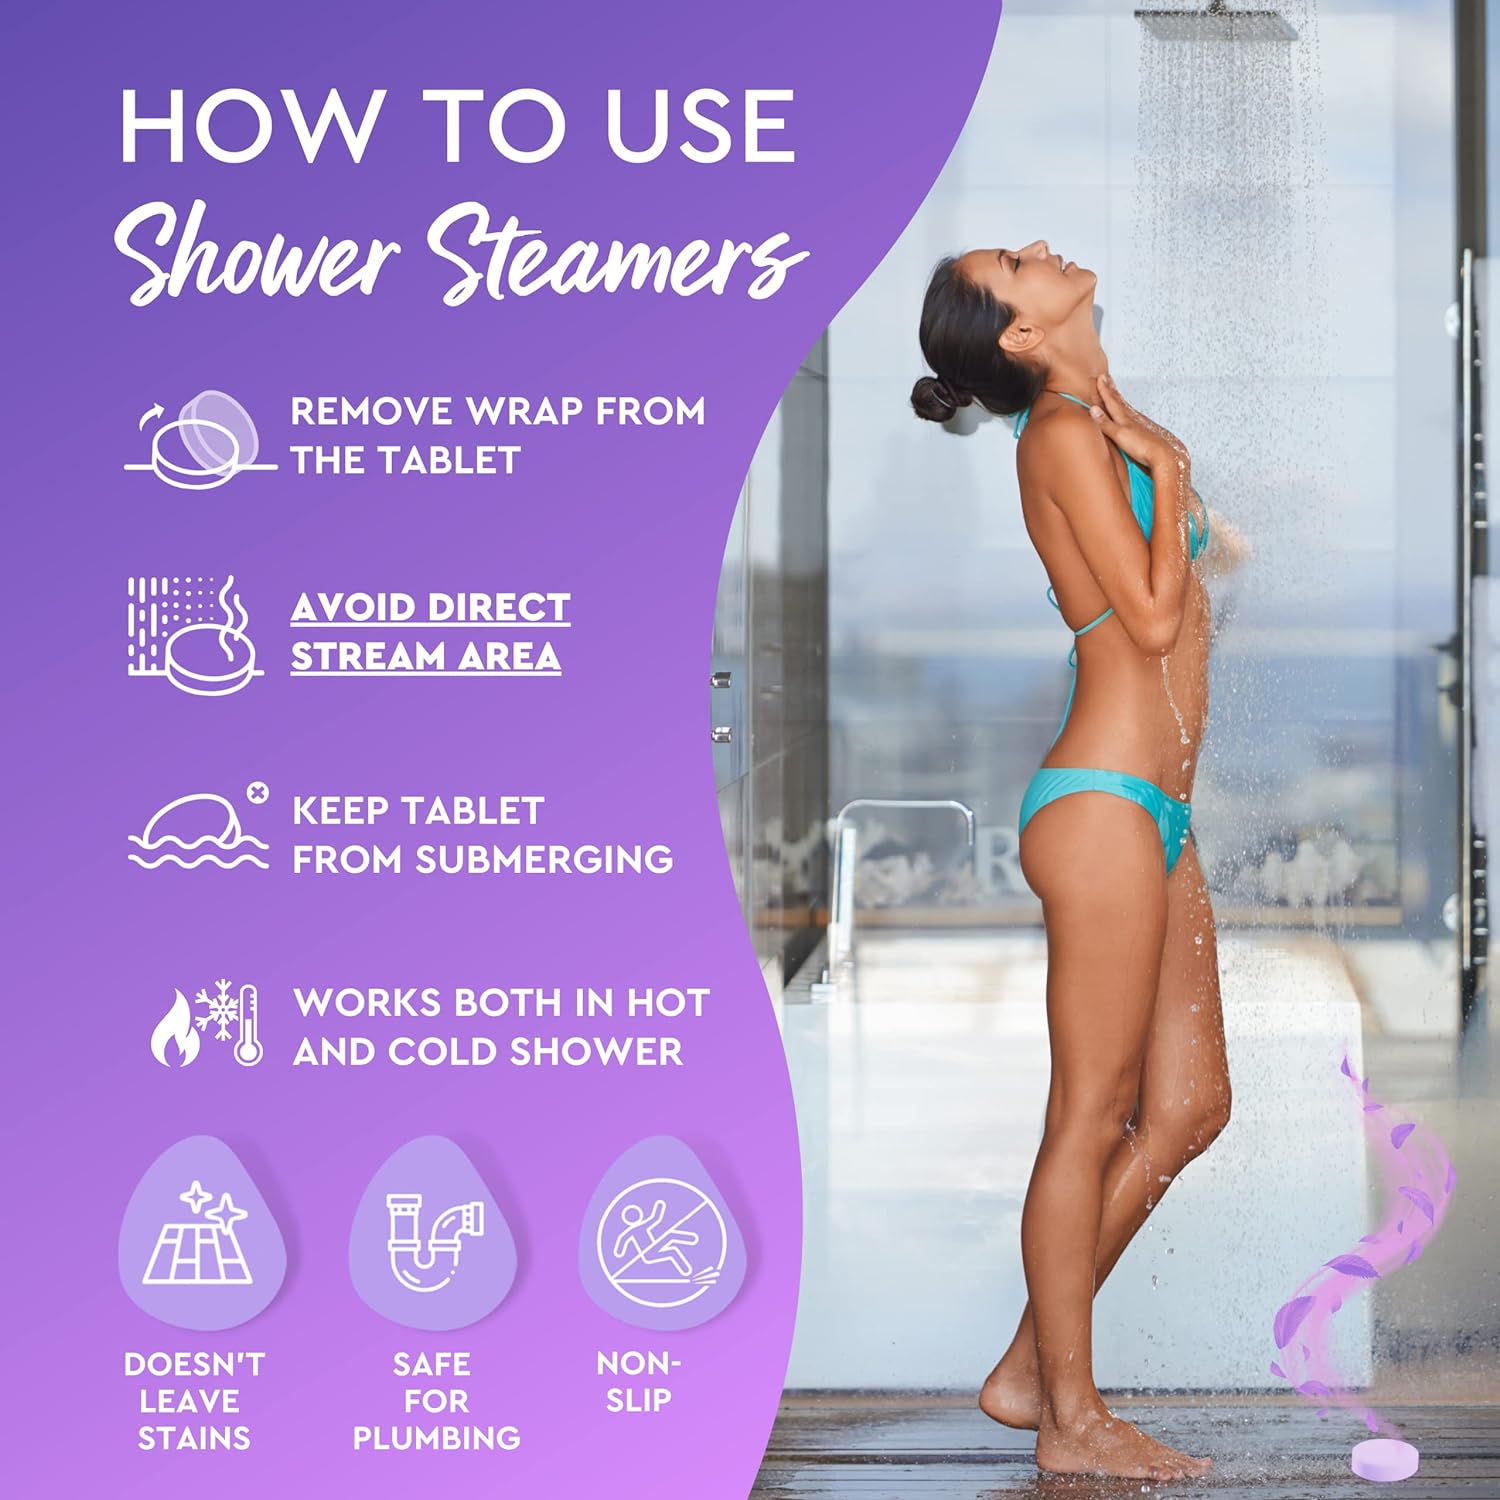 Cleverfy Shower Steamers Aromatherapy - Gift Set of 6 Shower Bombs with Essential Oils for Self Care, Relaxation and Luxuriate Home Spa. Shower Steamer Birthday Gifts for Women and Men. Purple Set